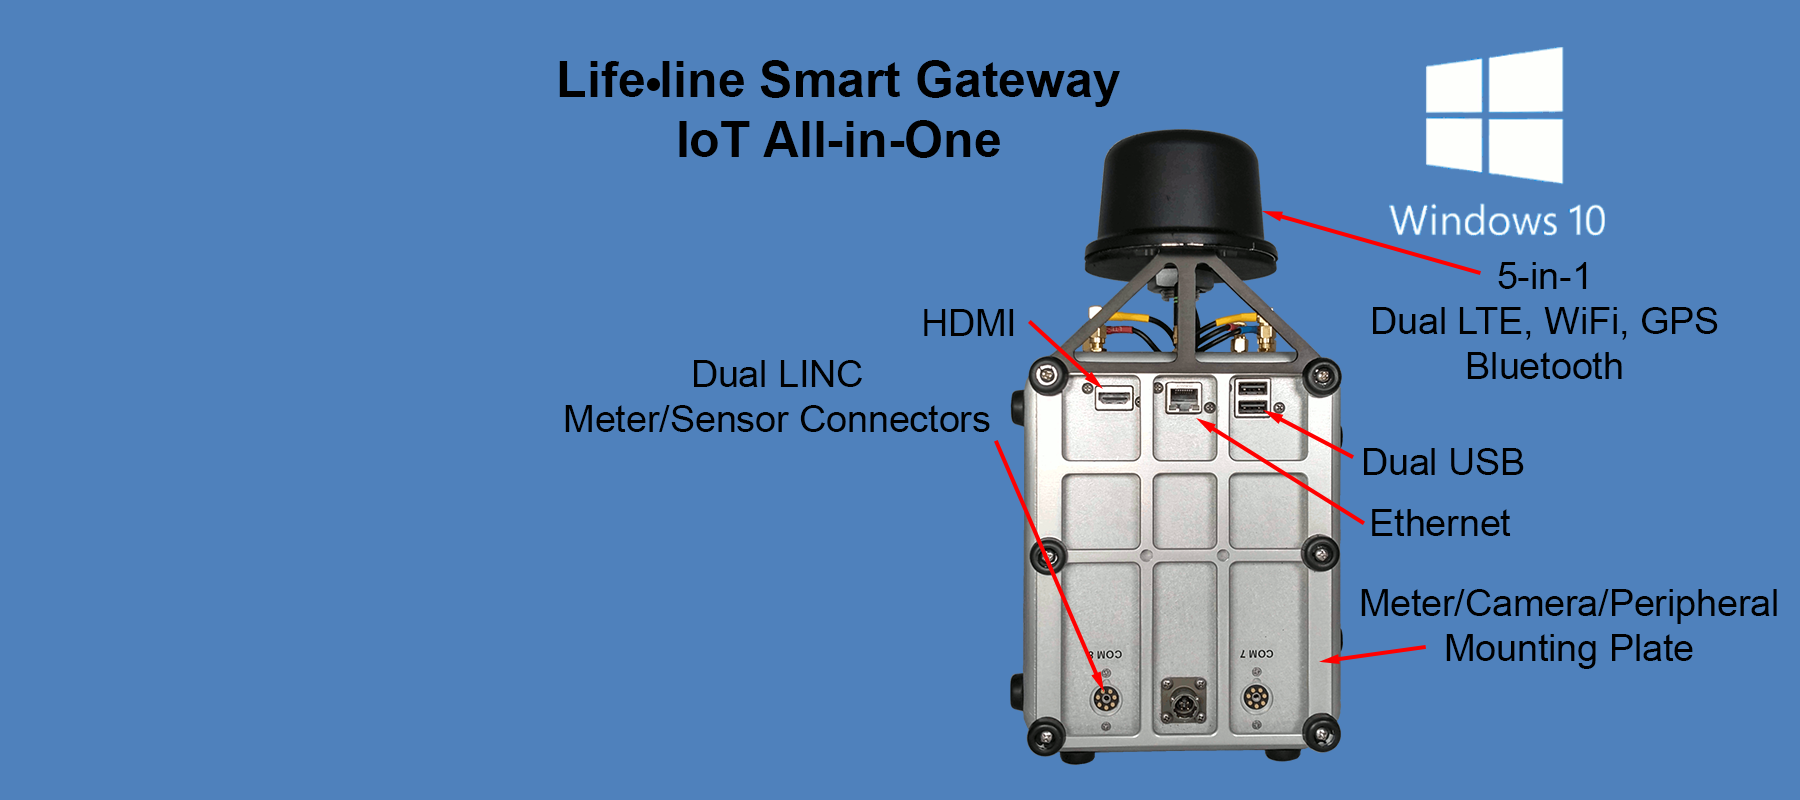  The  Life∙line Smart Gateway  IoT All-in-One integrates all elements of sensor data acquisition, analysis, display and transmission into a single self-contained portable enclosure. Analysis and display is achieved through the Gateway’s integral Wind